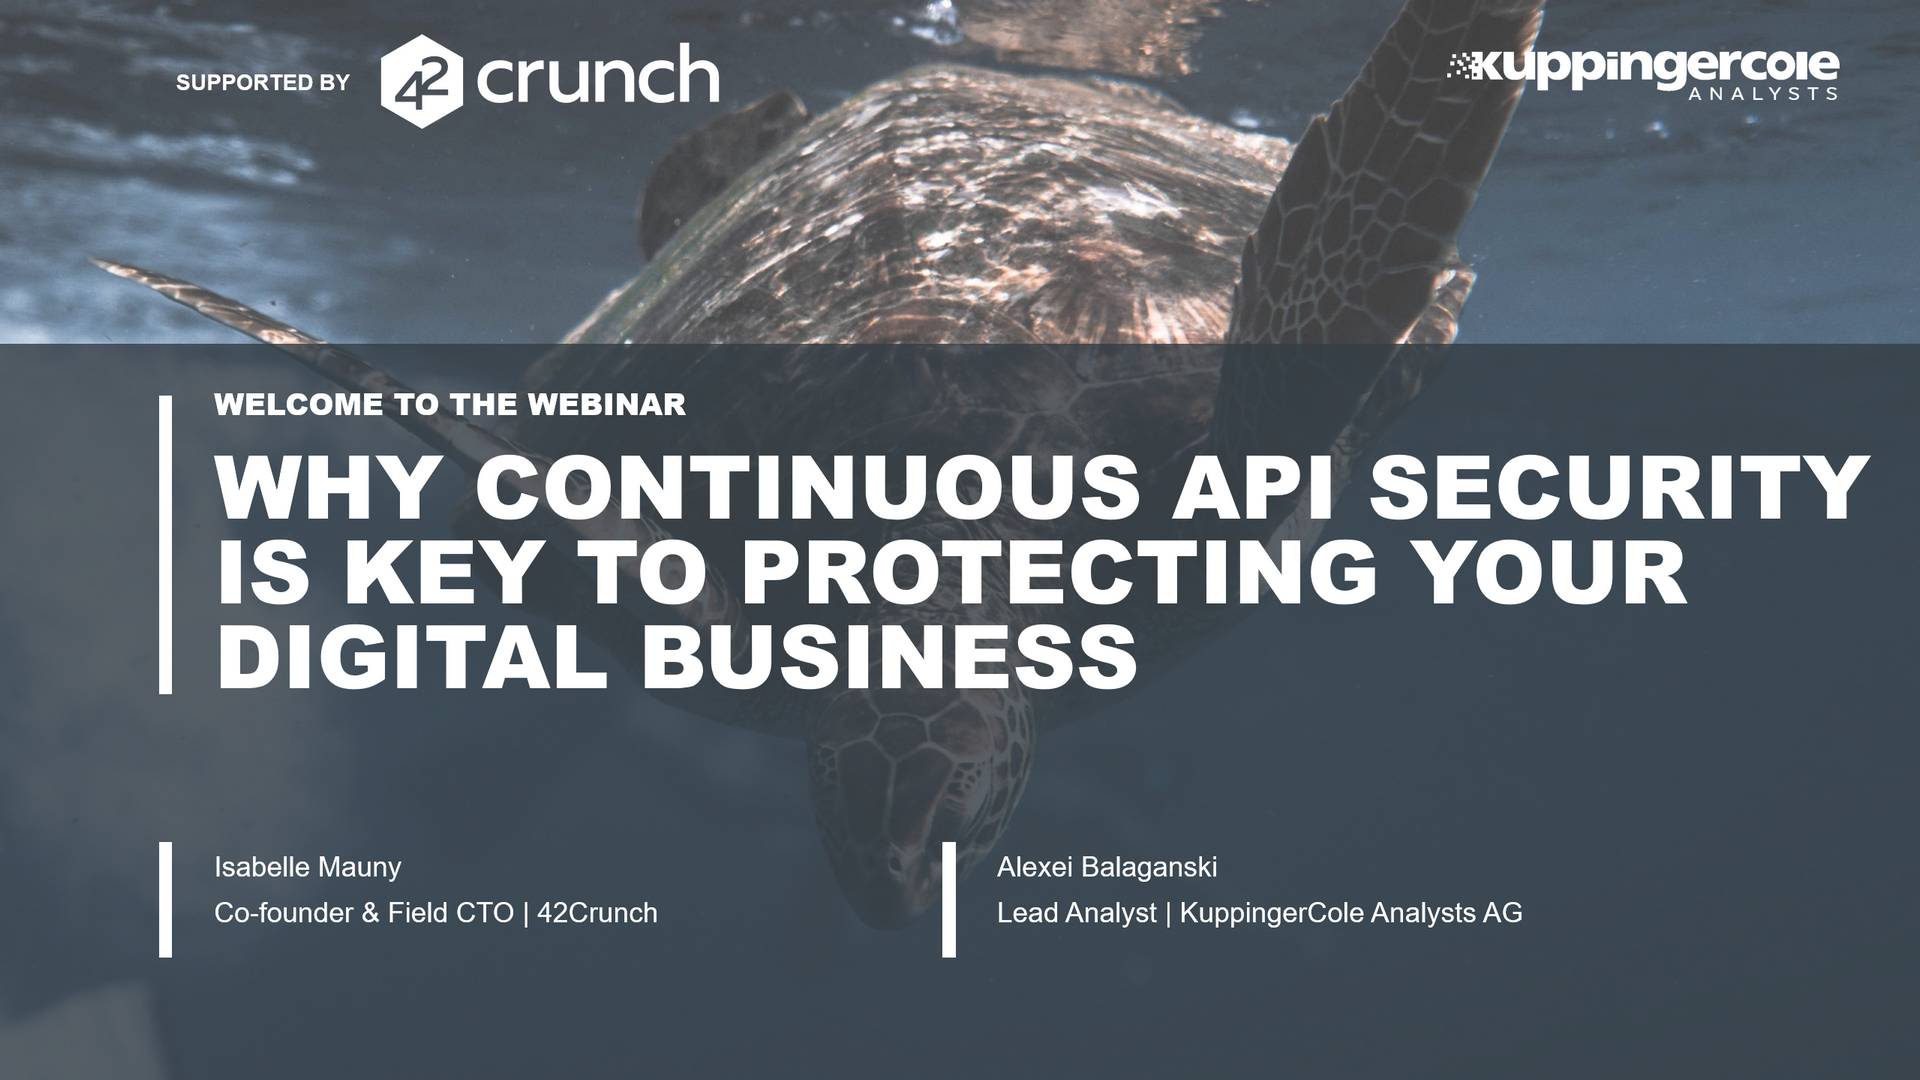 Why Continuous API Security Is Key to Protecting Your Digital Business